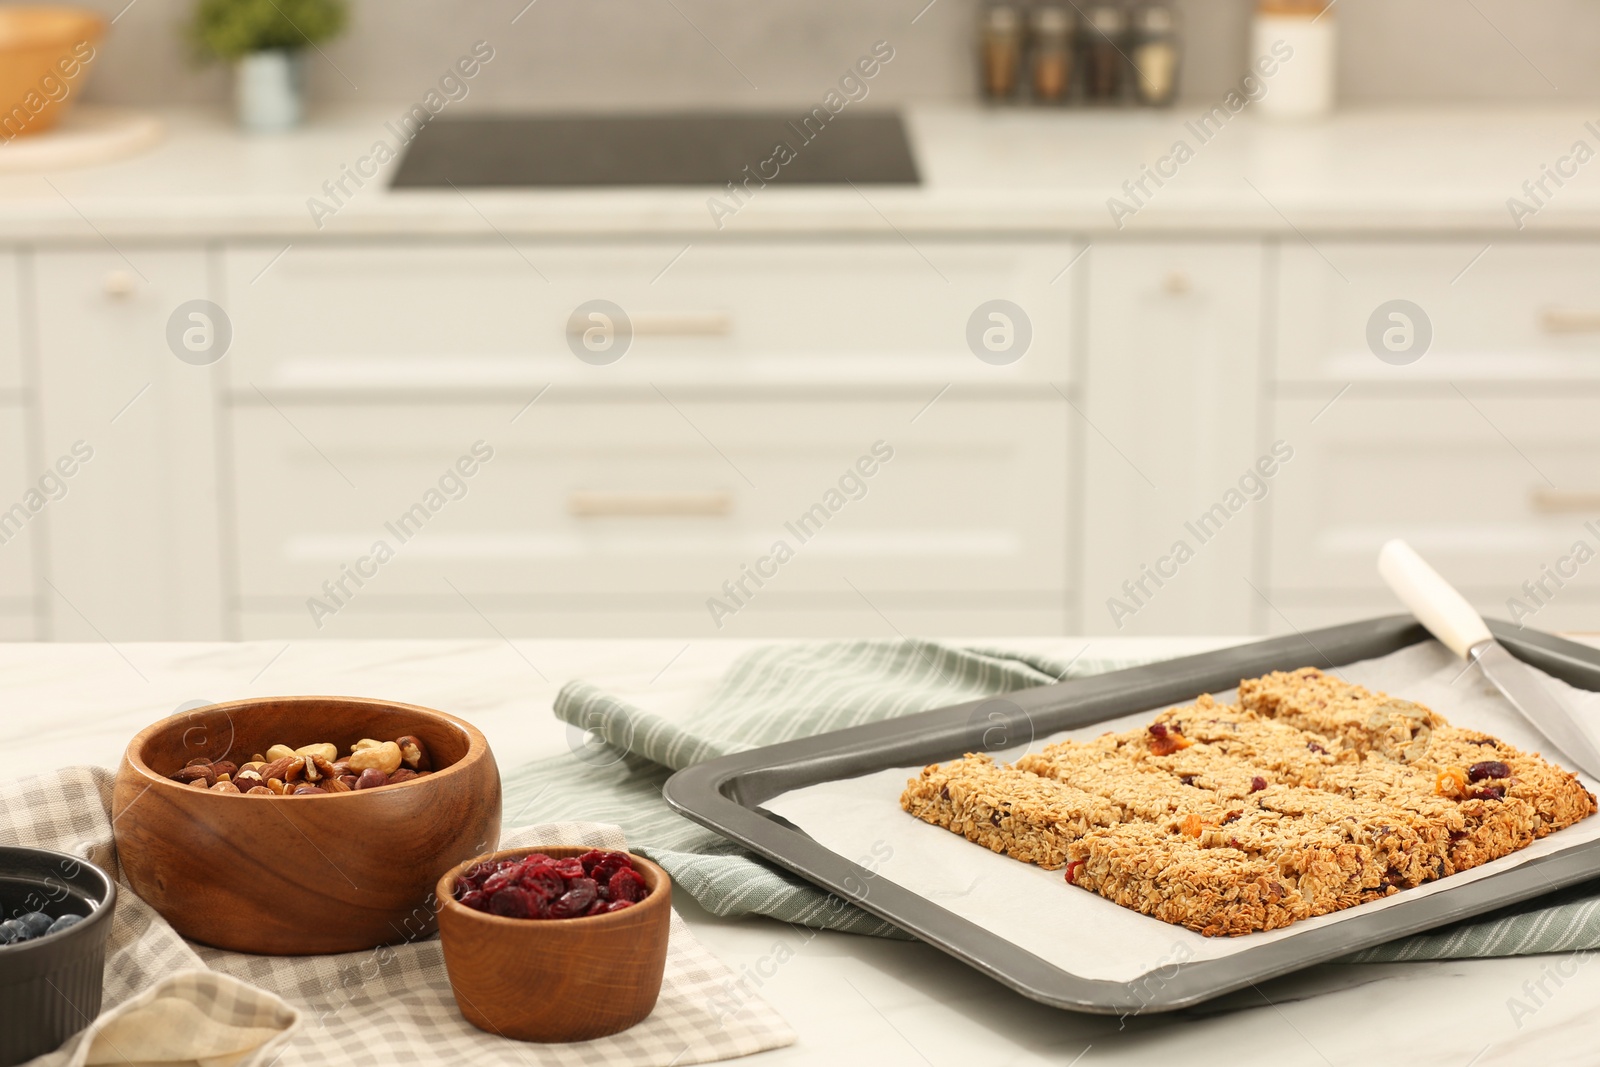 Photo of Baking tray with granola bars and ingredients on table in kitchen, space for text